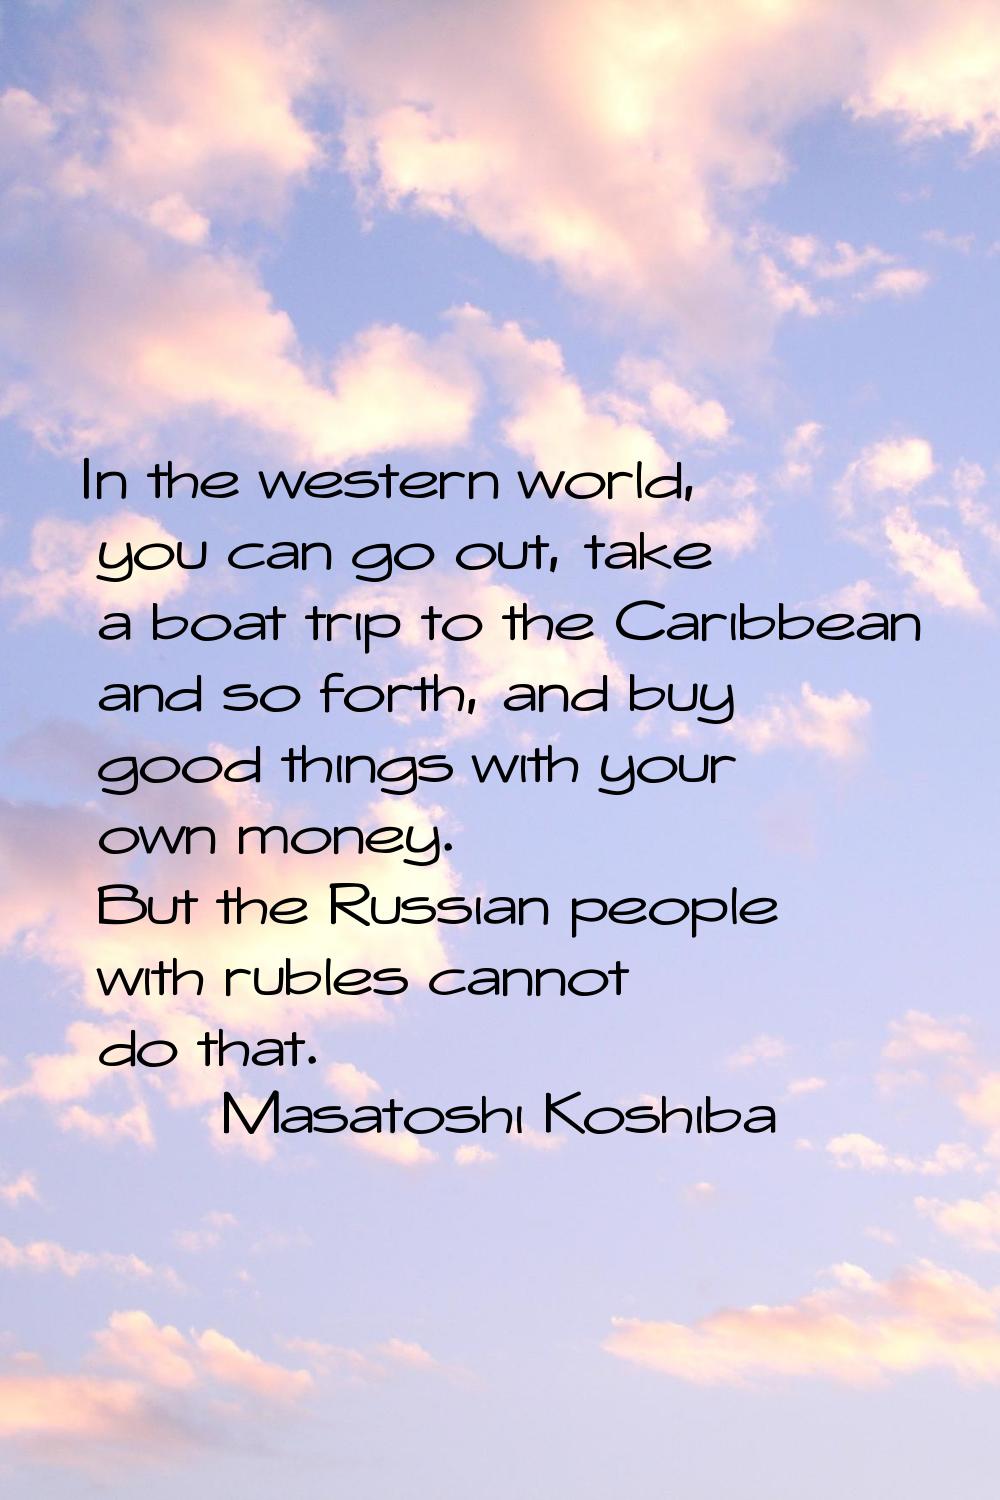 In the western world, you can go out, take a boat trip to the Caribbean and so forth, and buy good 